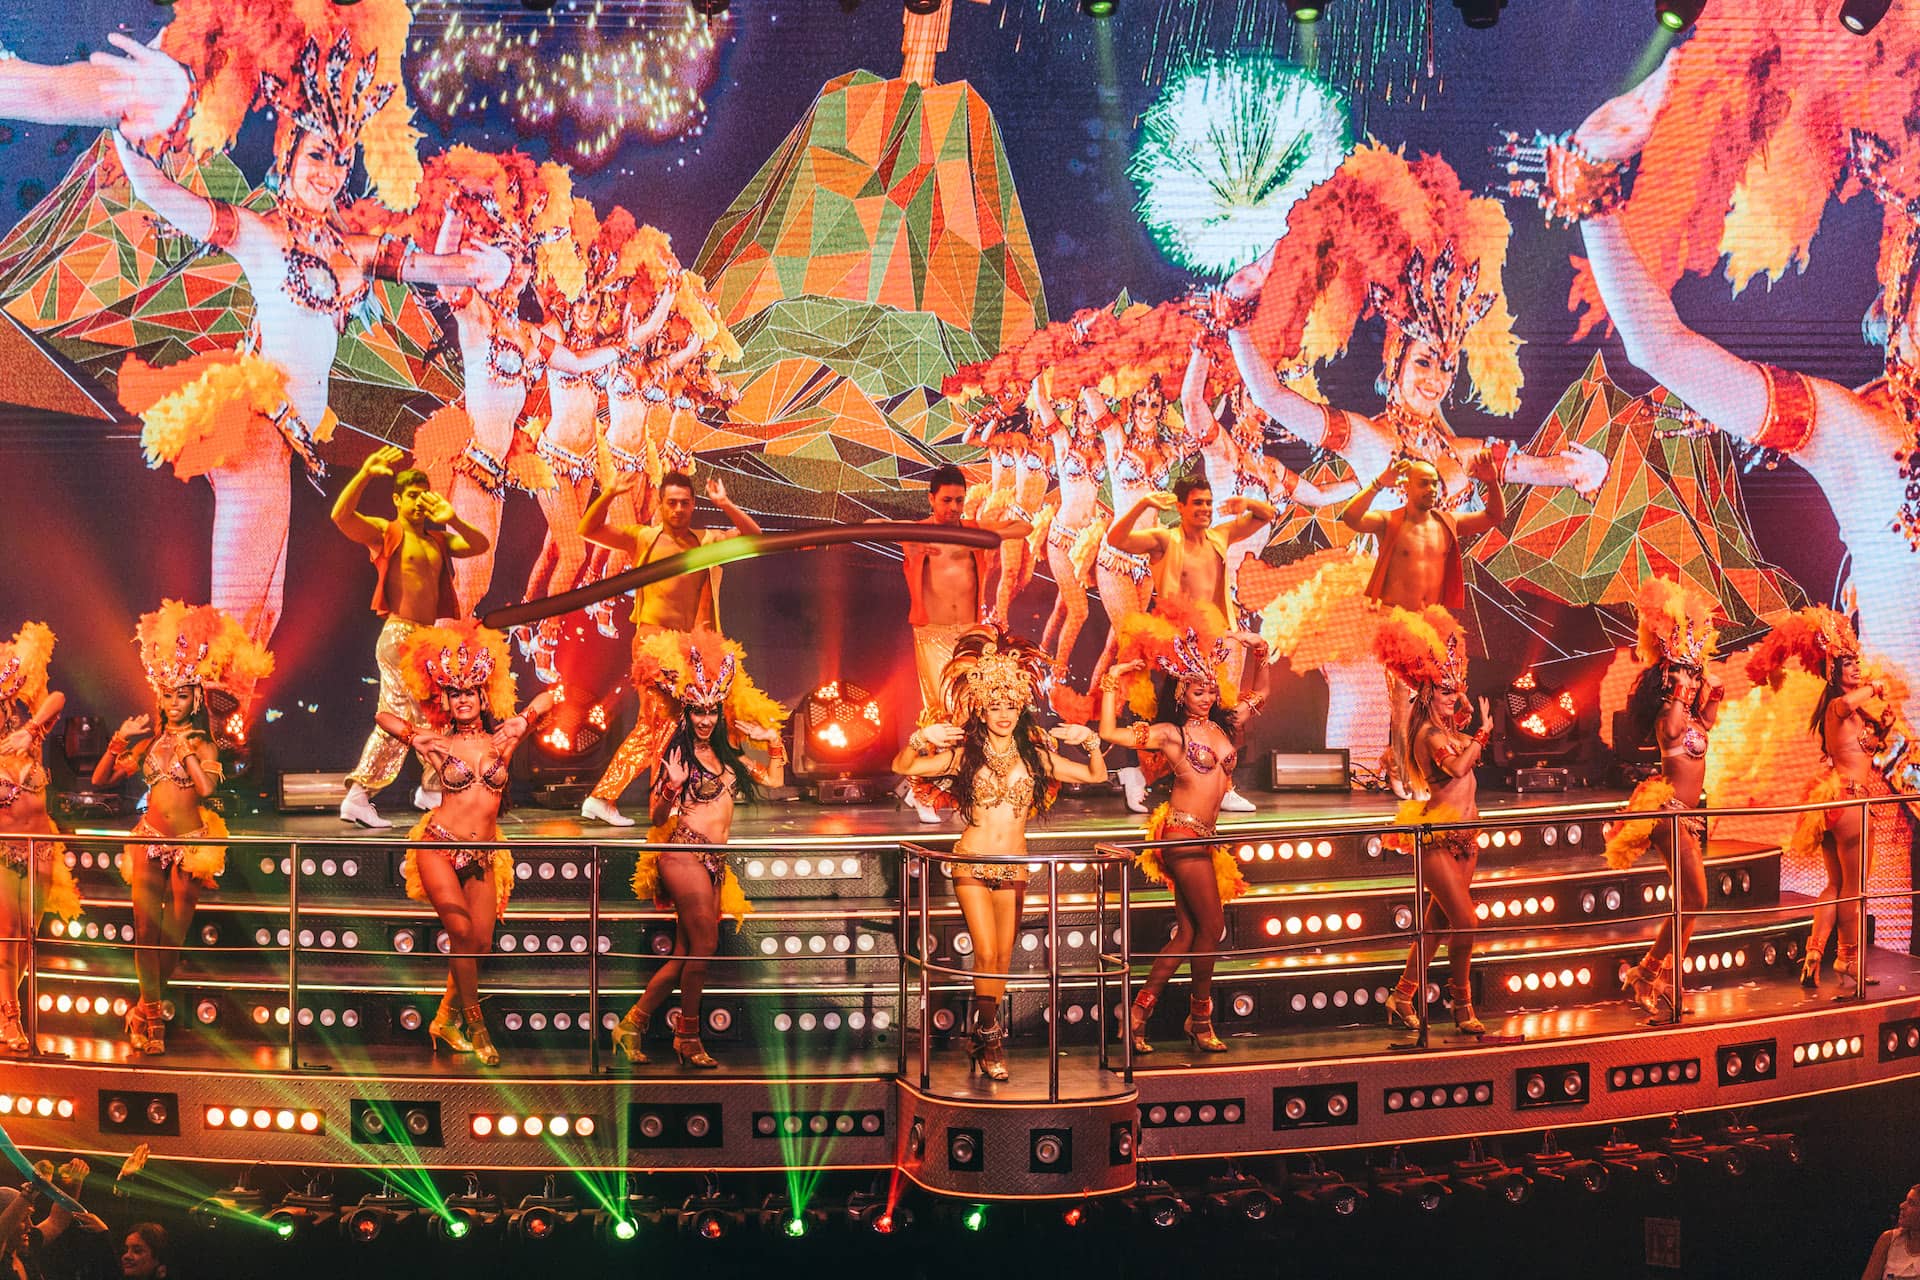 Brazil is in the house! Get ready to experience the famous Rio de Janeiro Carnival while dancing samba with our dancers who will pass on the joy and great atmosphere of this famous Brazilian party.